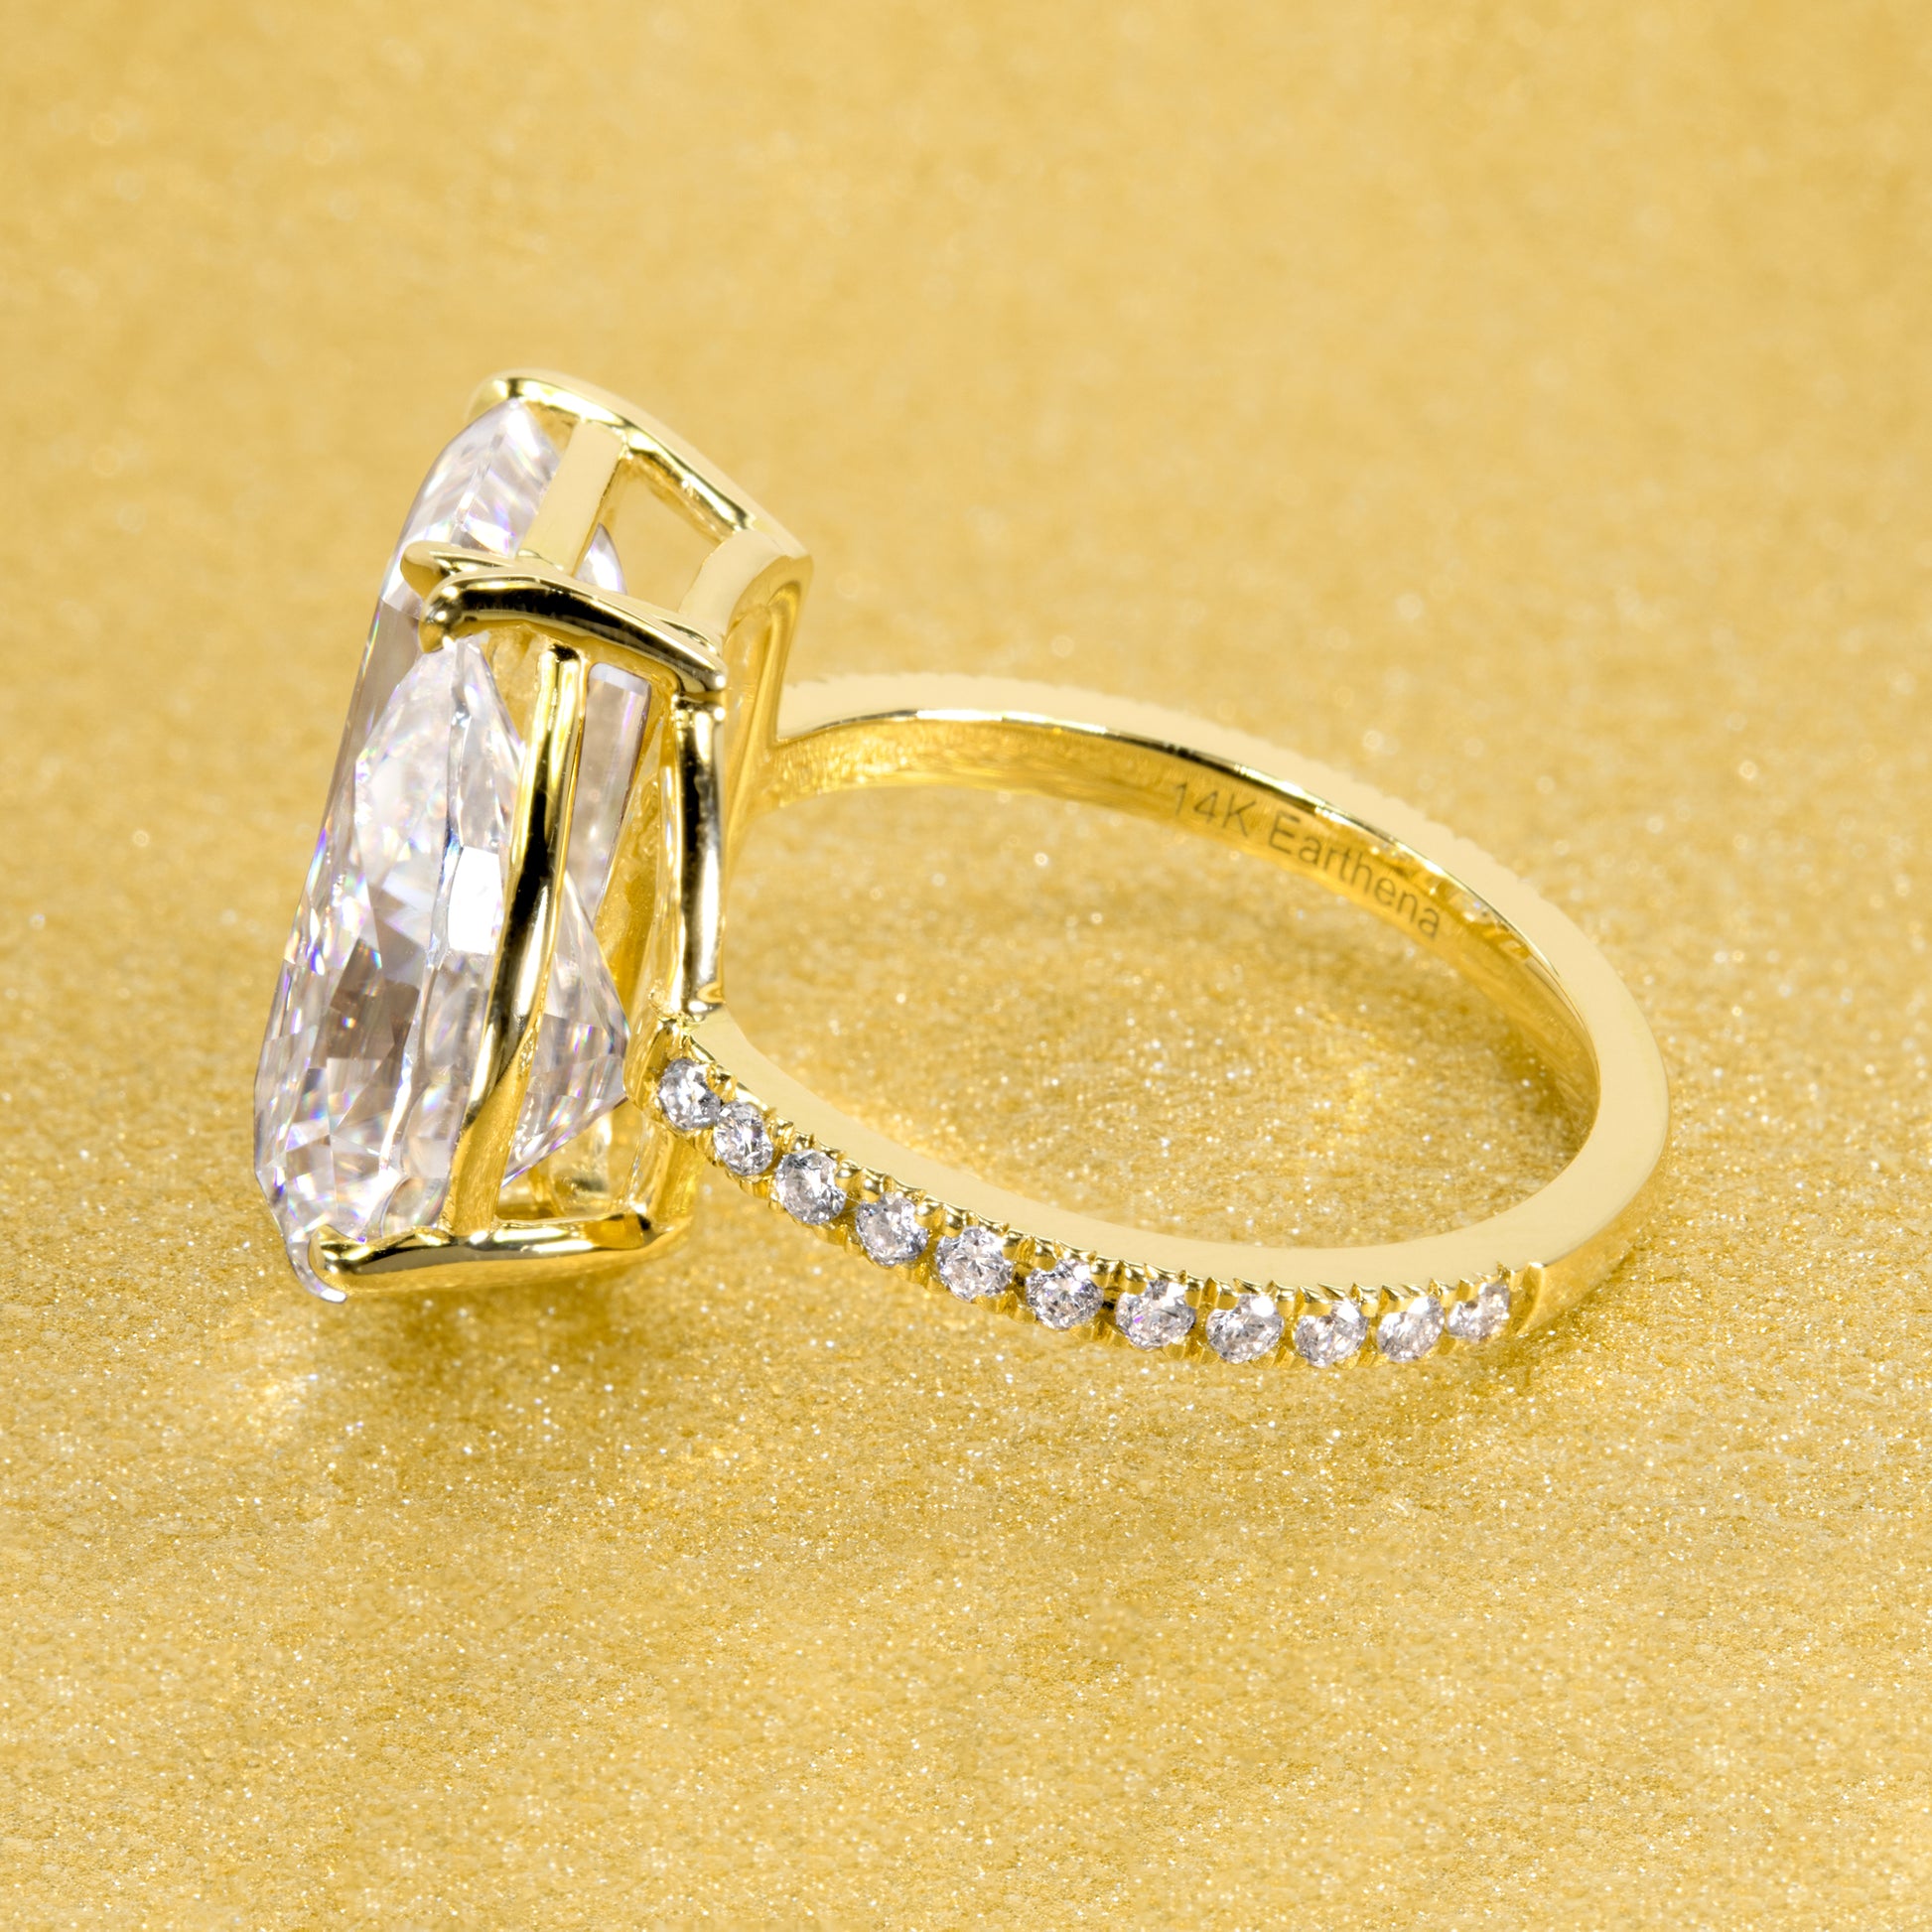 The Gemini, Toi et Moi 6 ctw Elongated Radiant-cut and Pear-shaped Moissanite and Lab-grown diamond Engagement Ring crafted in 14K or 18K gold by Earthena Jewelry